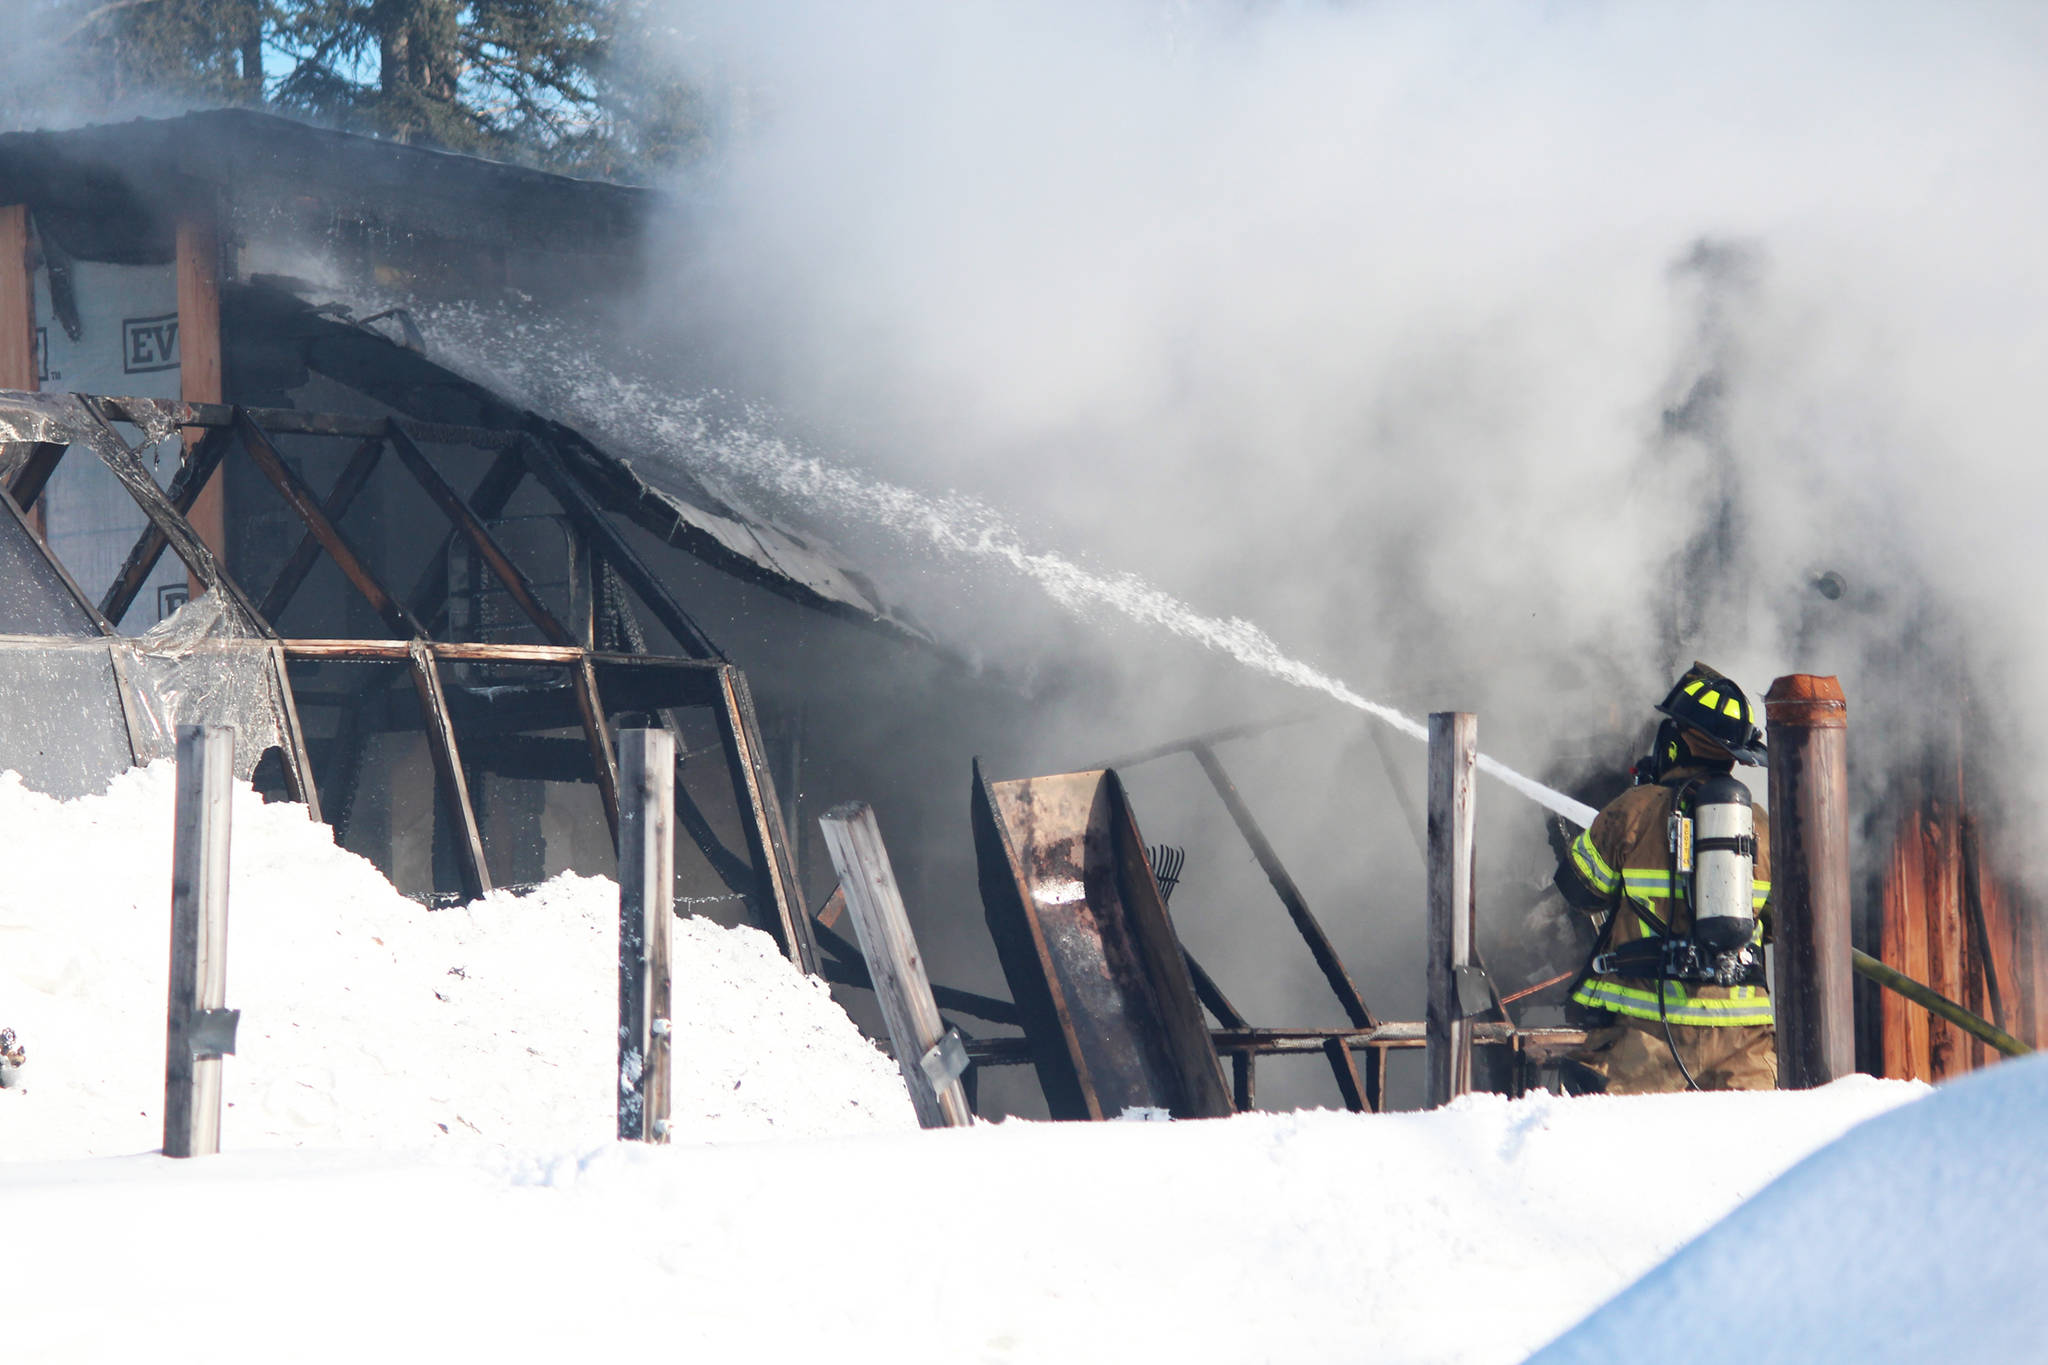 A firefighter aims water at a burning building Wednesday, March 1, 2017 at a residence on Bastien Drive in Nikiski, Alaska. The Nikiski and Kenai fire departments responded to a house fire Wednesday afternoon, in which no one was hurt. (Megan Pacer/Peninsula Clarion)